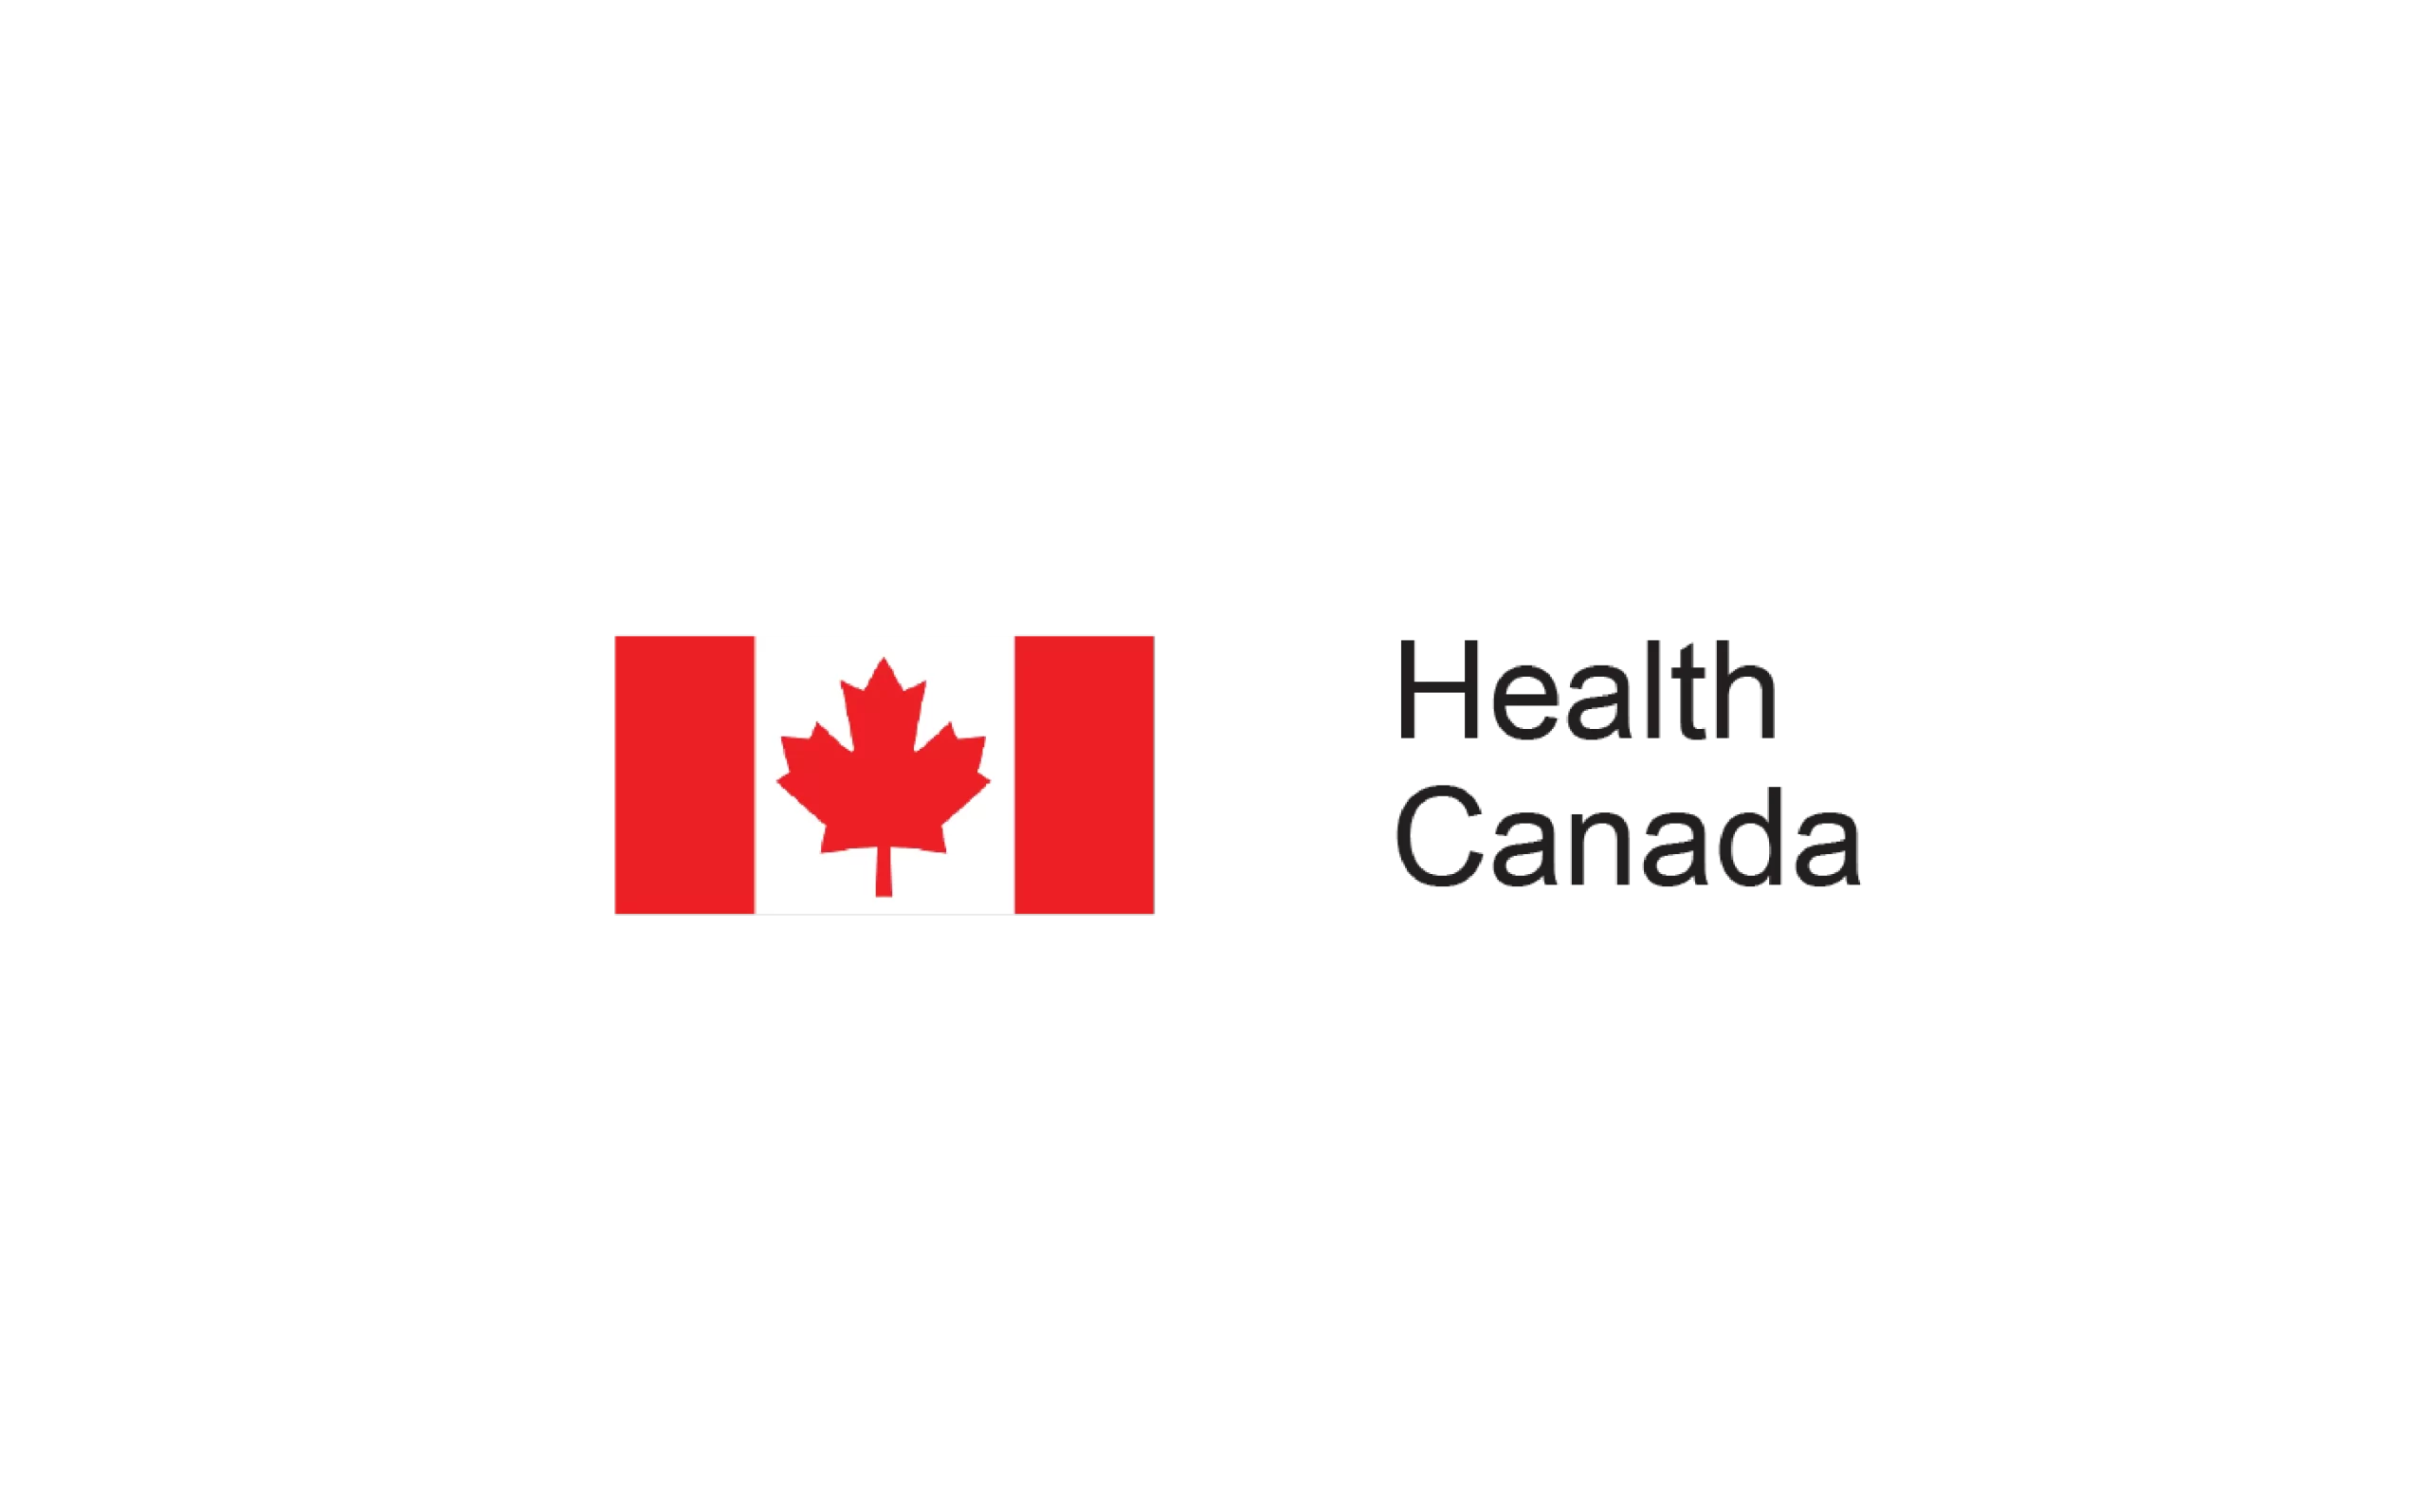 Red and white Health Canada logo